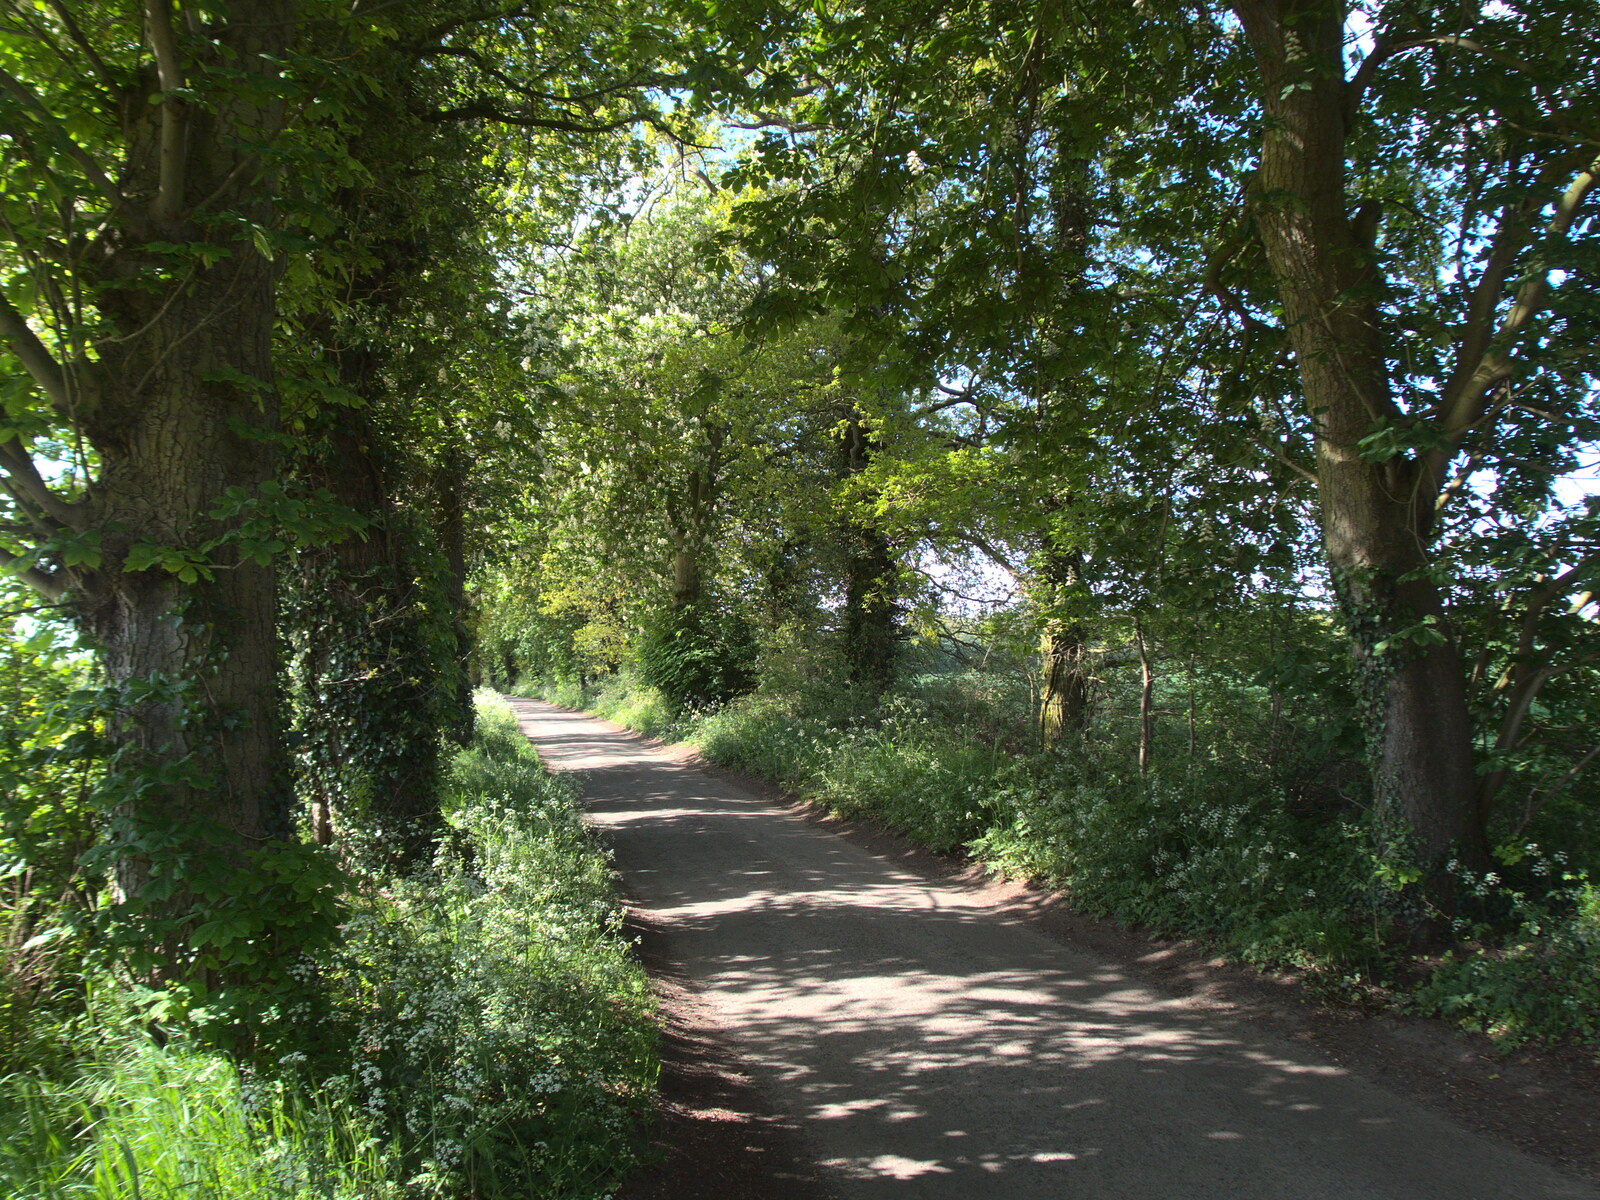 The lane to Thornham is in full leaf from The BSCC at the Ampersand Tap, Sawmills Road, Diss, Norfolk - 20th May 2021